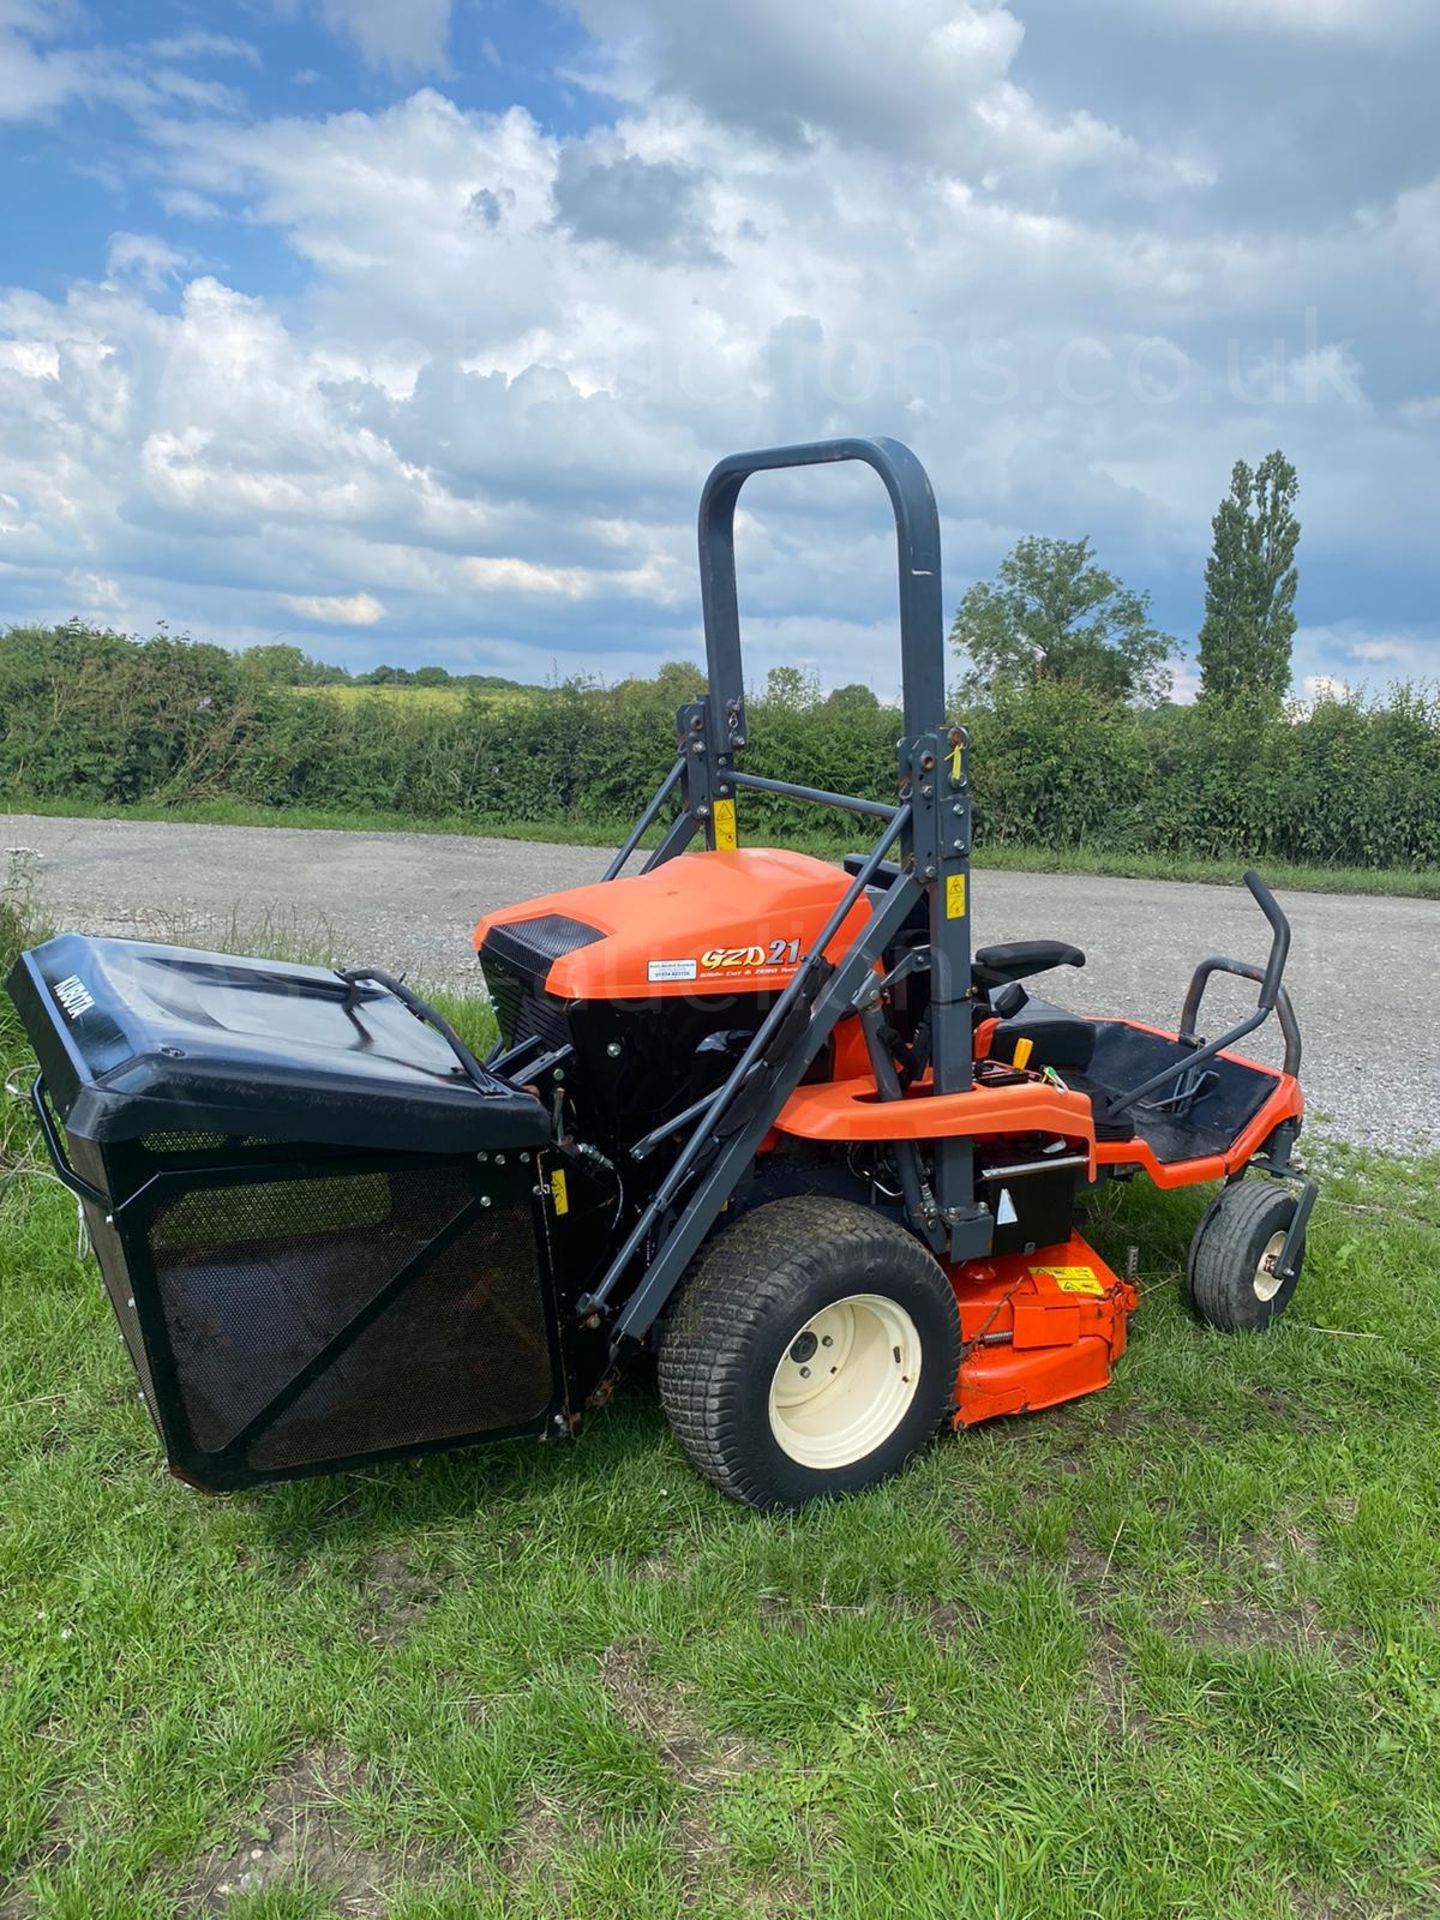 2015 KUBOTA GZD21 HIGH TIP ZERO TURN MOWER, SOLD NEW MID 2017, SHOWING A LOW 203 HOURS *PLUS VAT* - Image 12 of 16